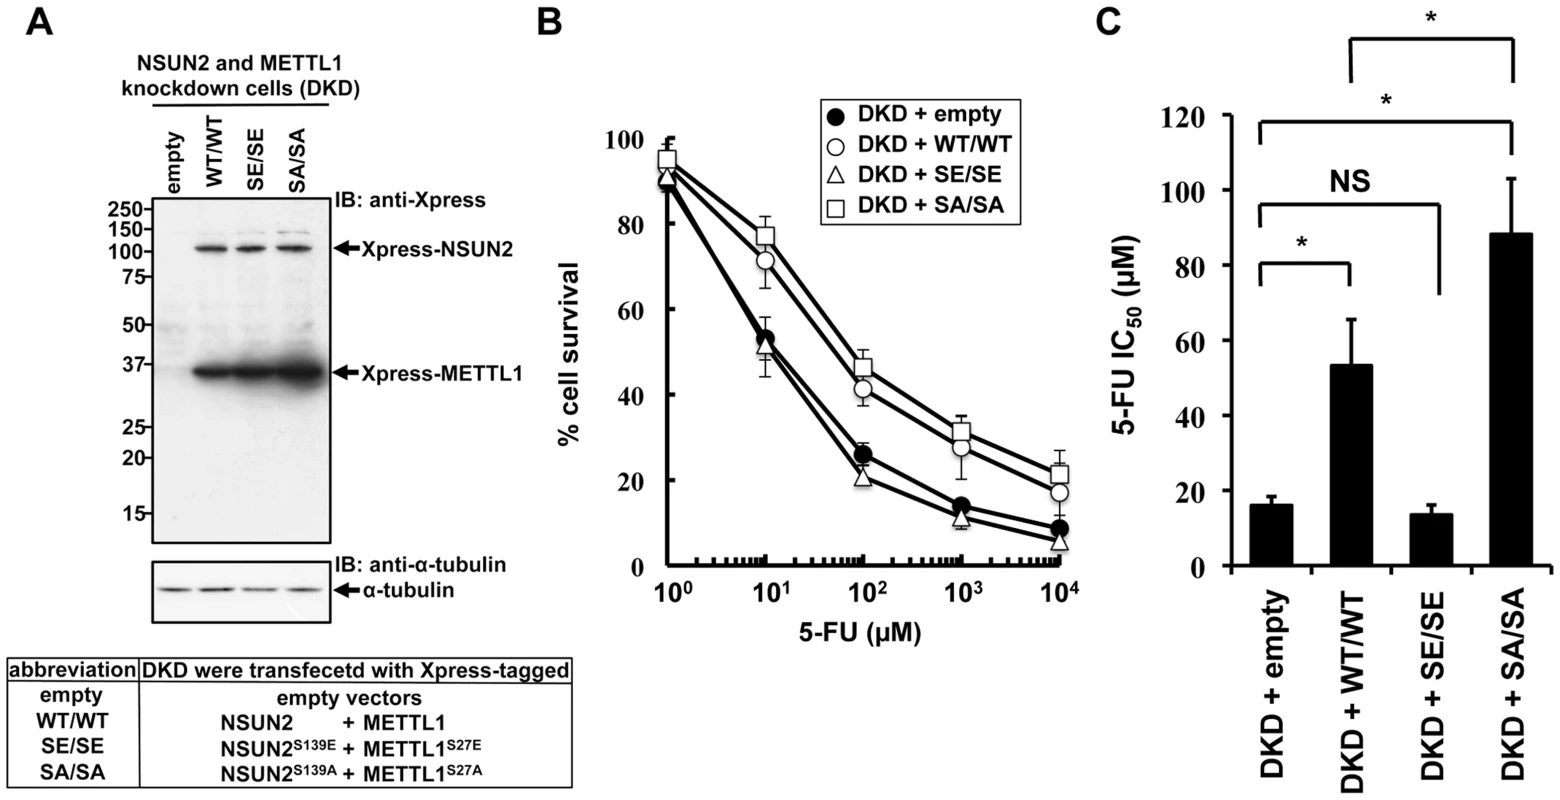 Effects of co-expression of NSUN2 and METTL1 on the cytotoxic effects of heat stress and 5-FU in NSUN2 and METTL1 knockdown cells.